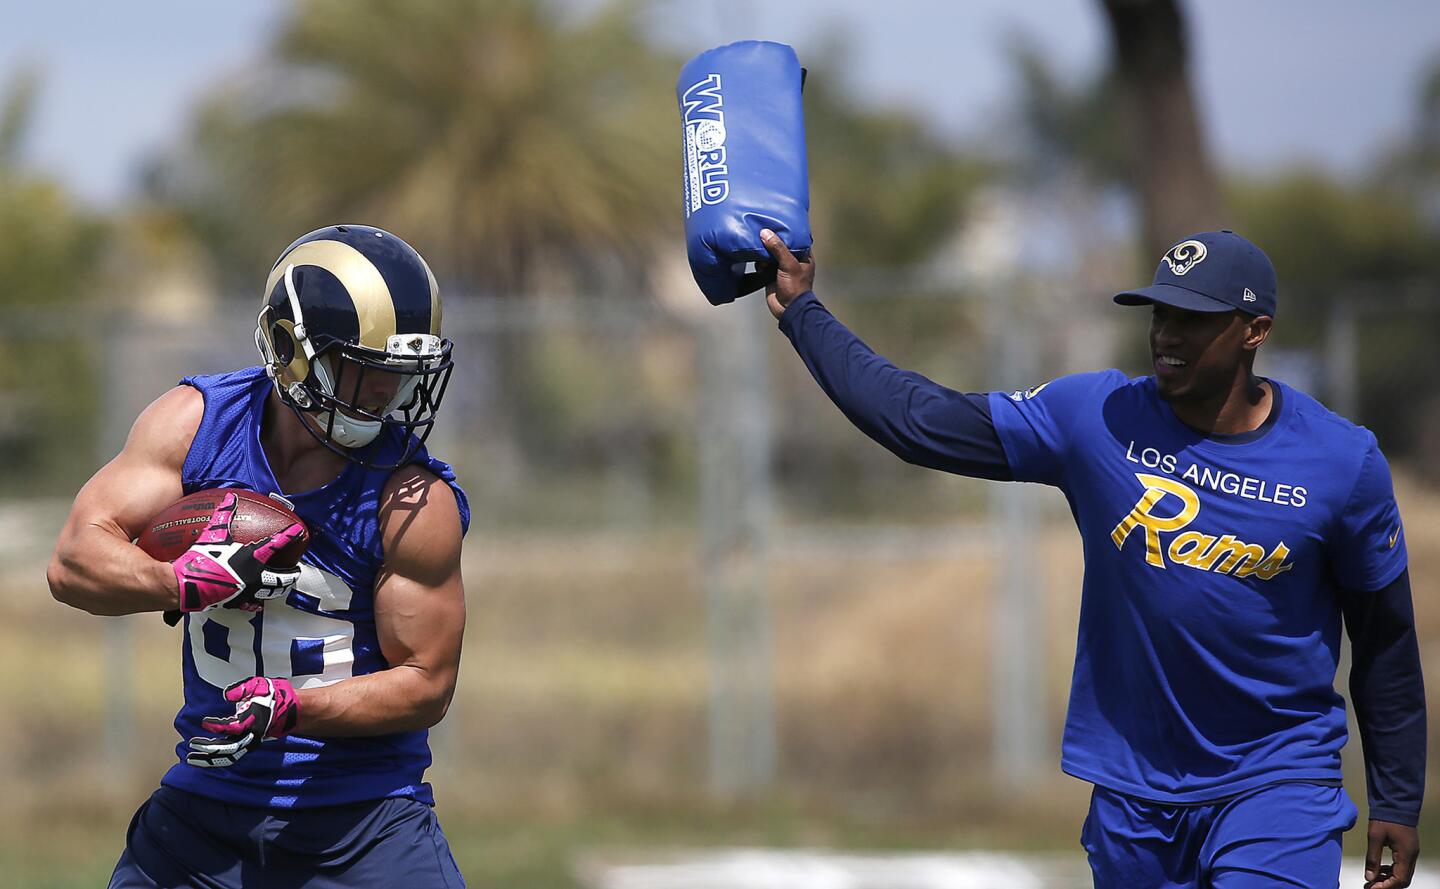 Rams wide receiver Nelson Spruce makes a catch with a coach nearby trying to disloge the ball during the rookie mini-camp on Saturday in Oxnard.